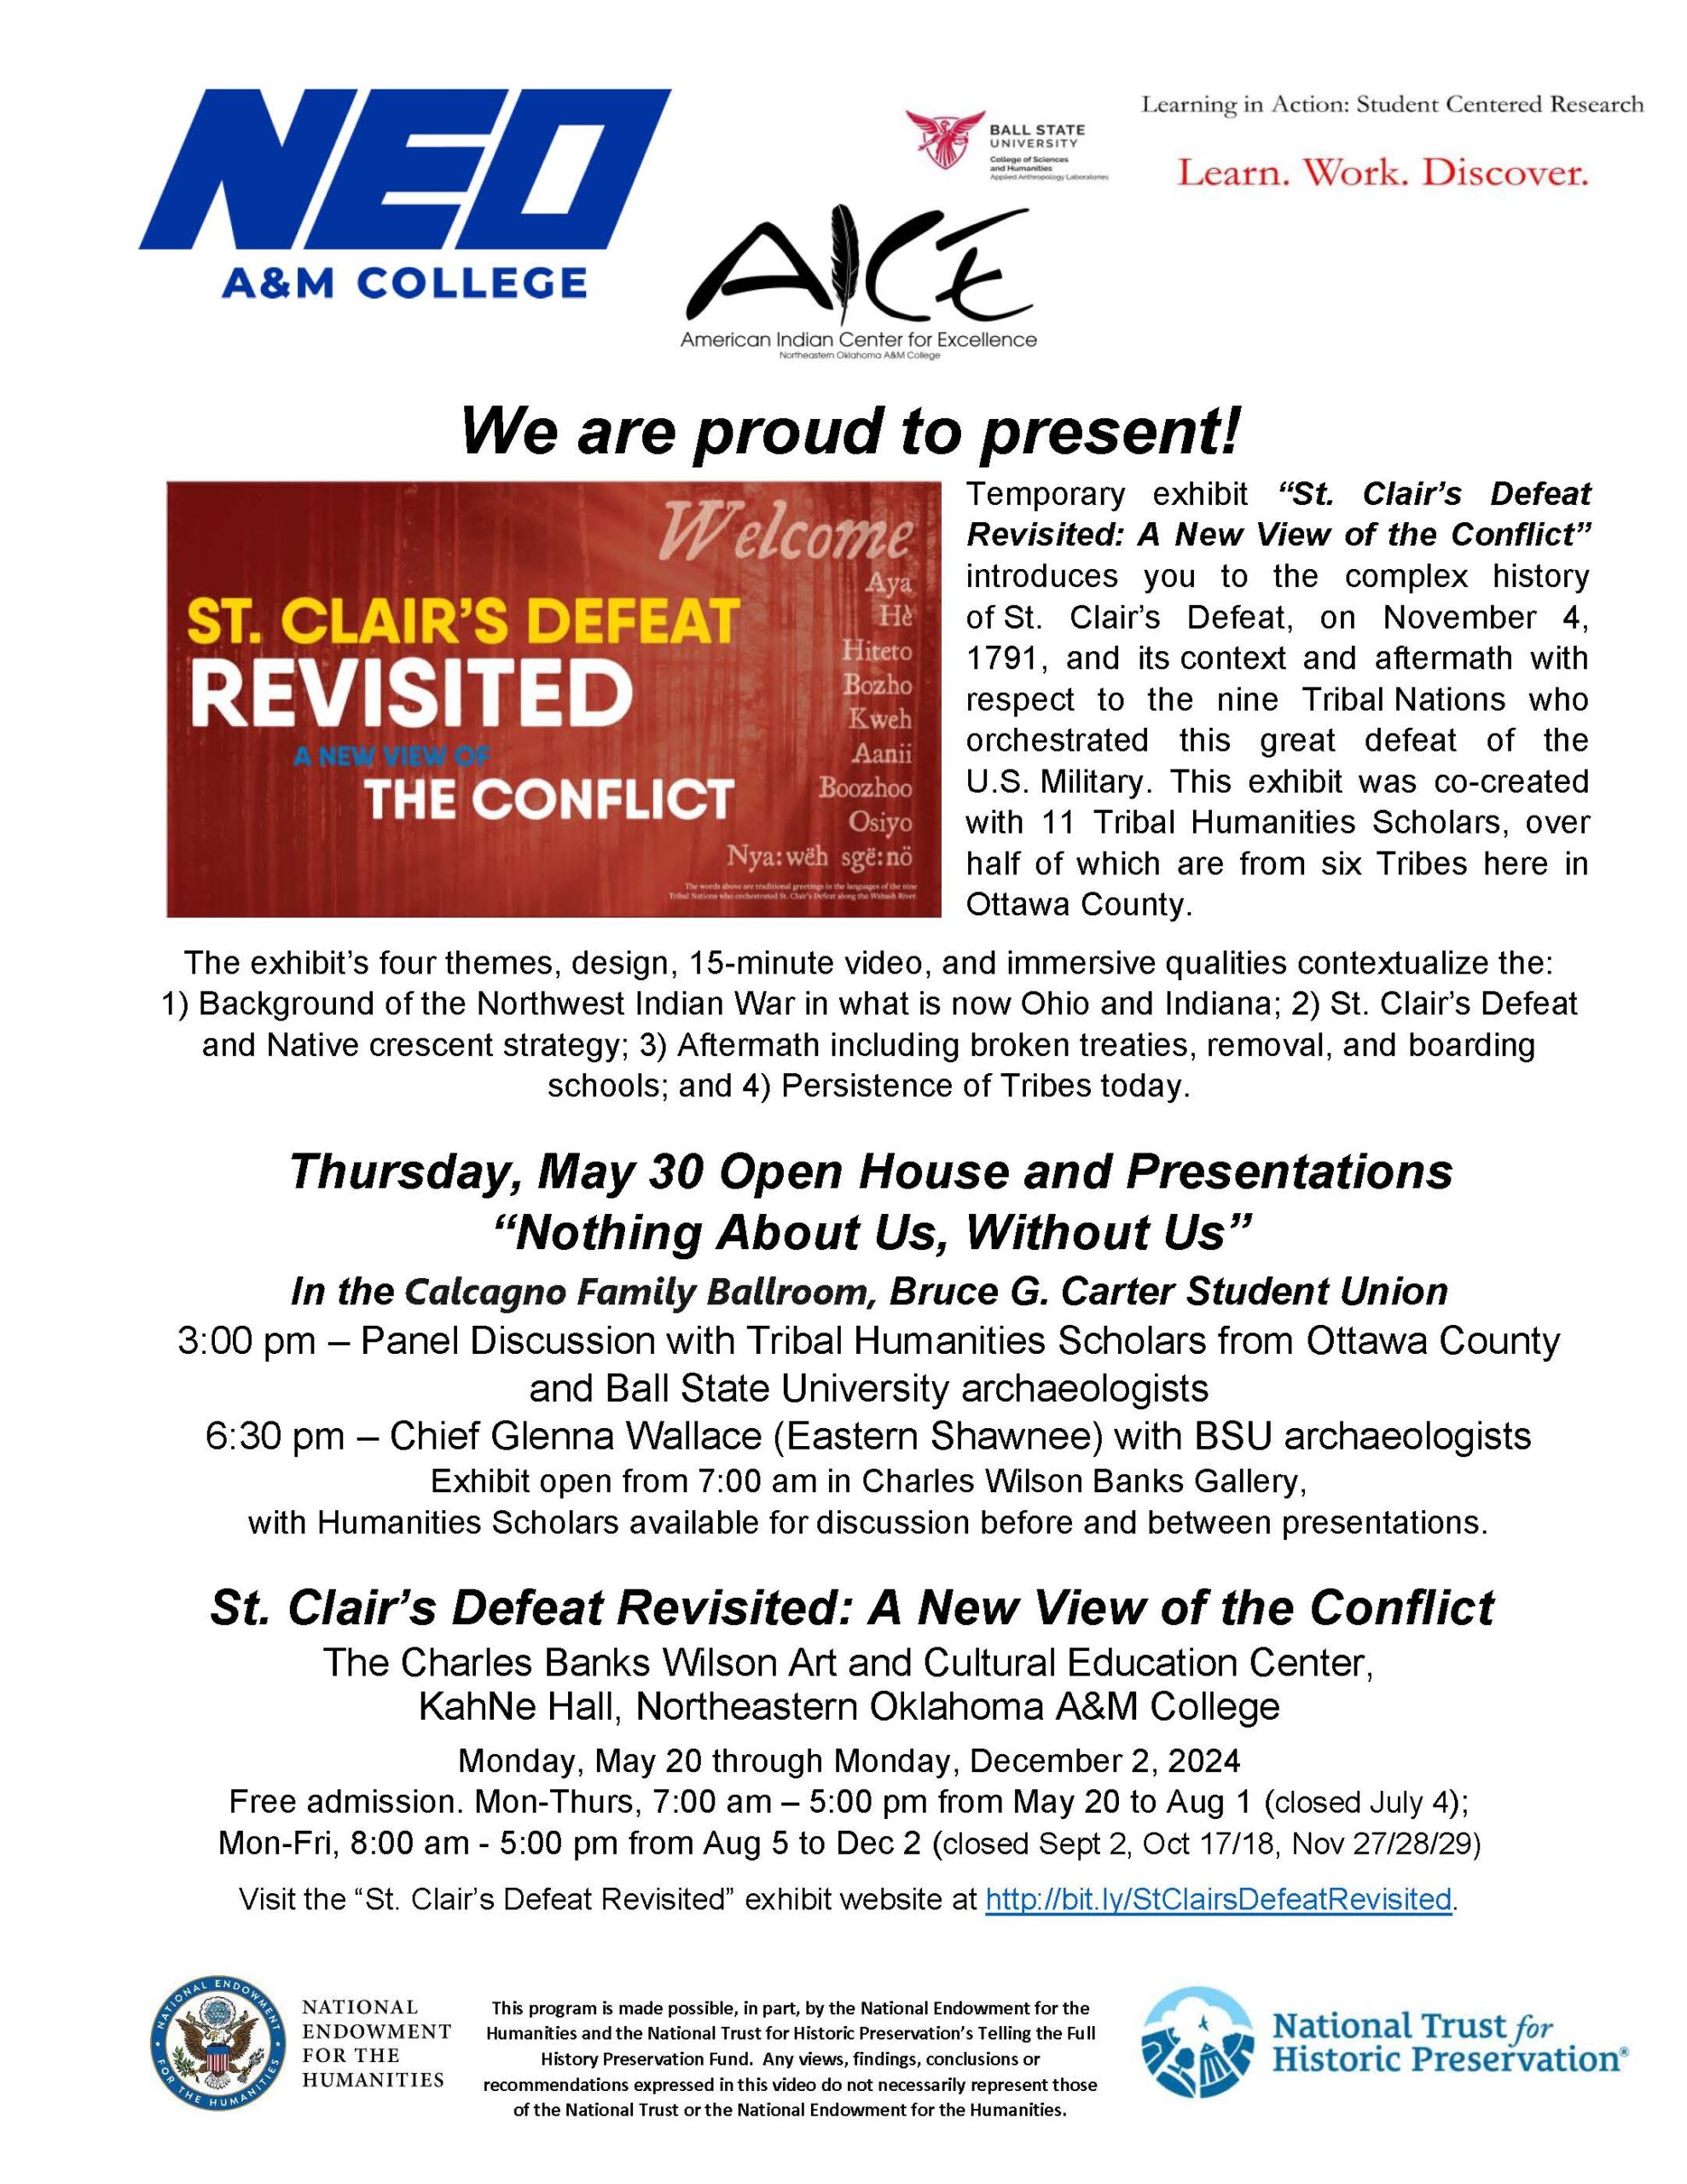 “St. Clair’s Defeat Revisited: A new View of the Conflict” hosted by NEO A & M College